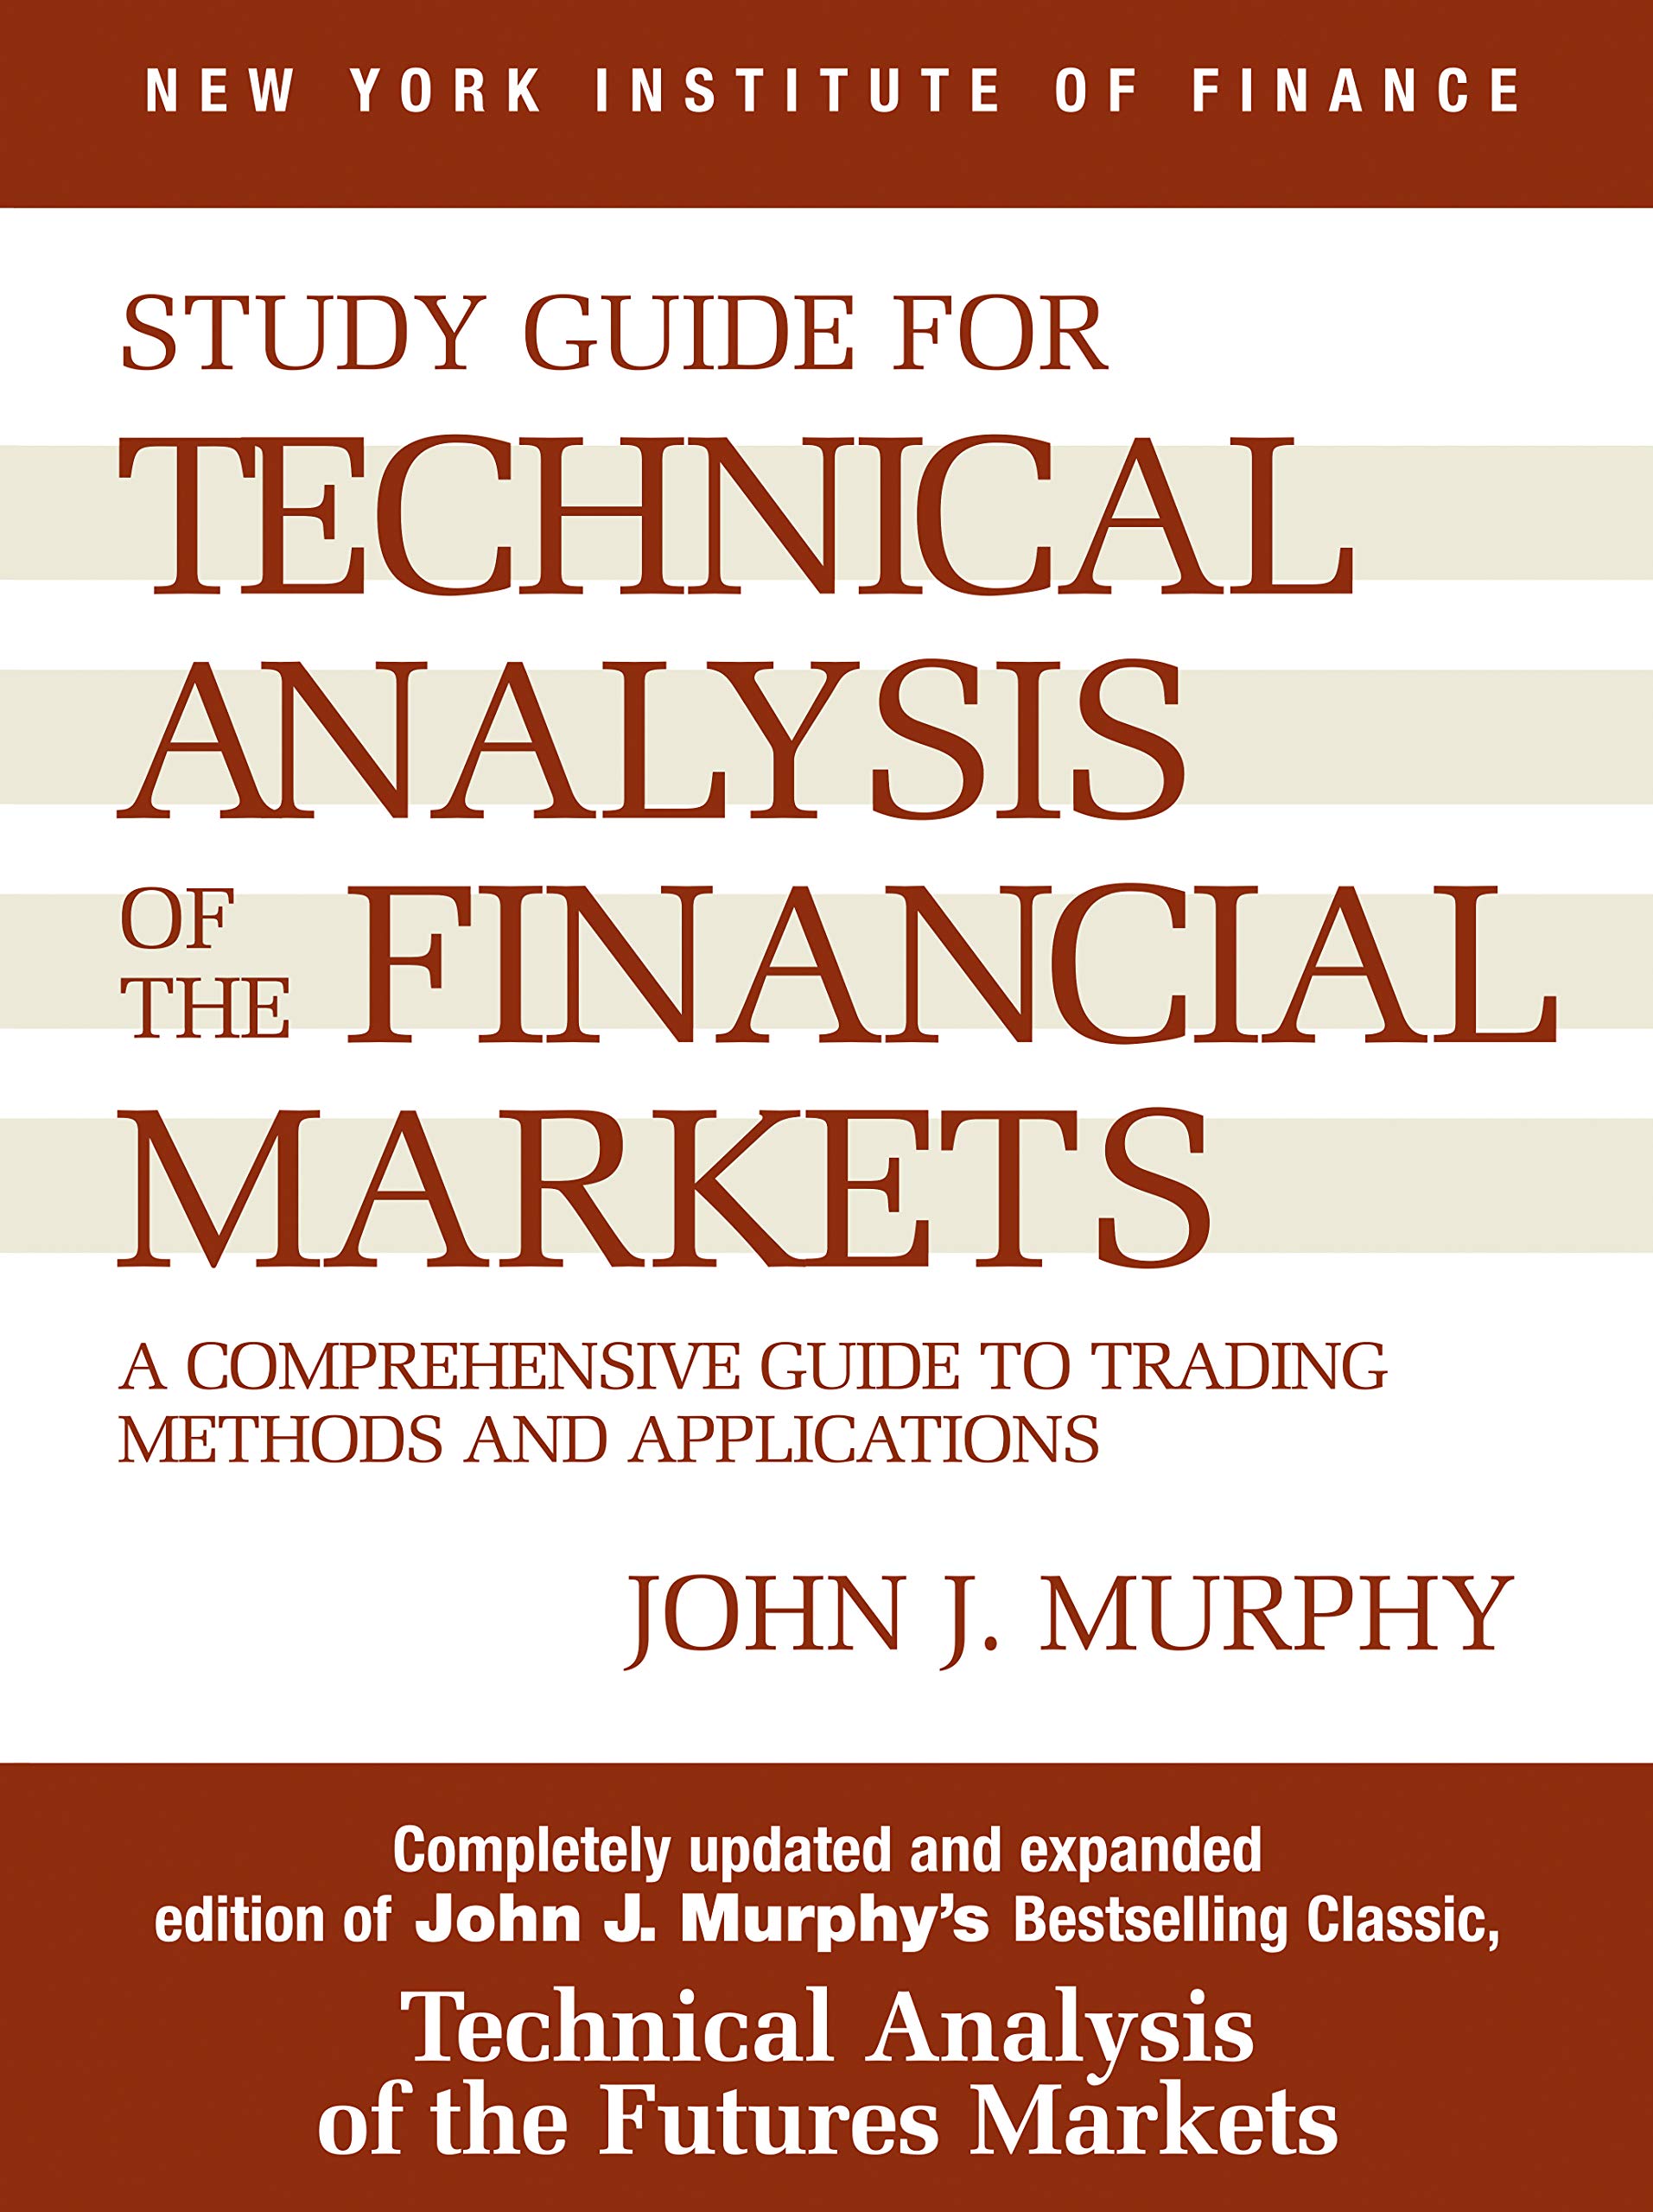 Mua Study Guide to Technical Analysis of the Financial Markets: A Comprehensive Guide to Trading Methods and Applications (New York Institute of Finance S) trên Amazon Mỹ chính hãng 2022 | Fado